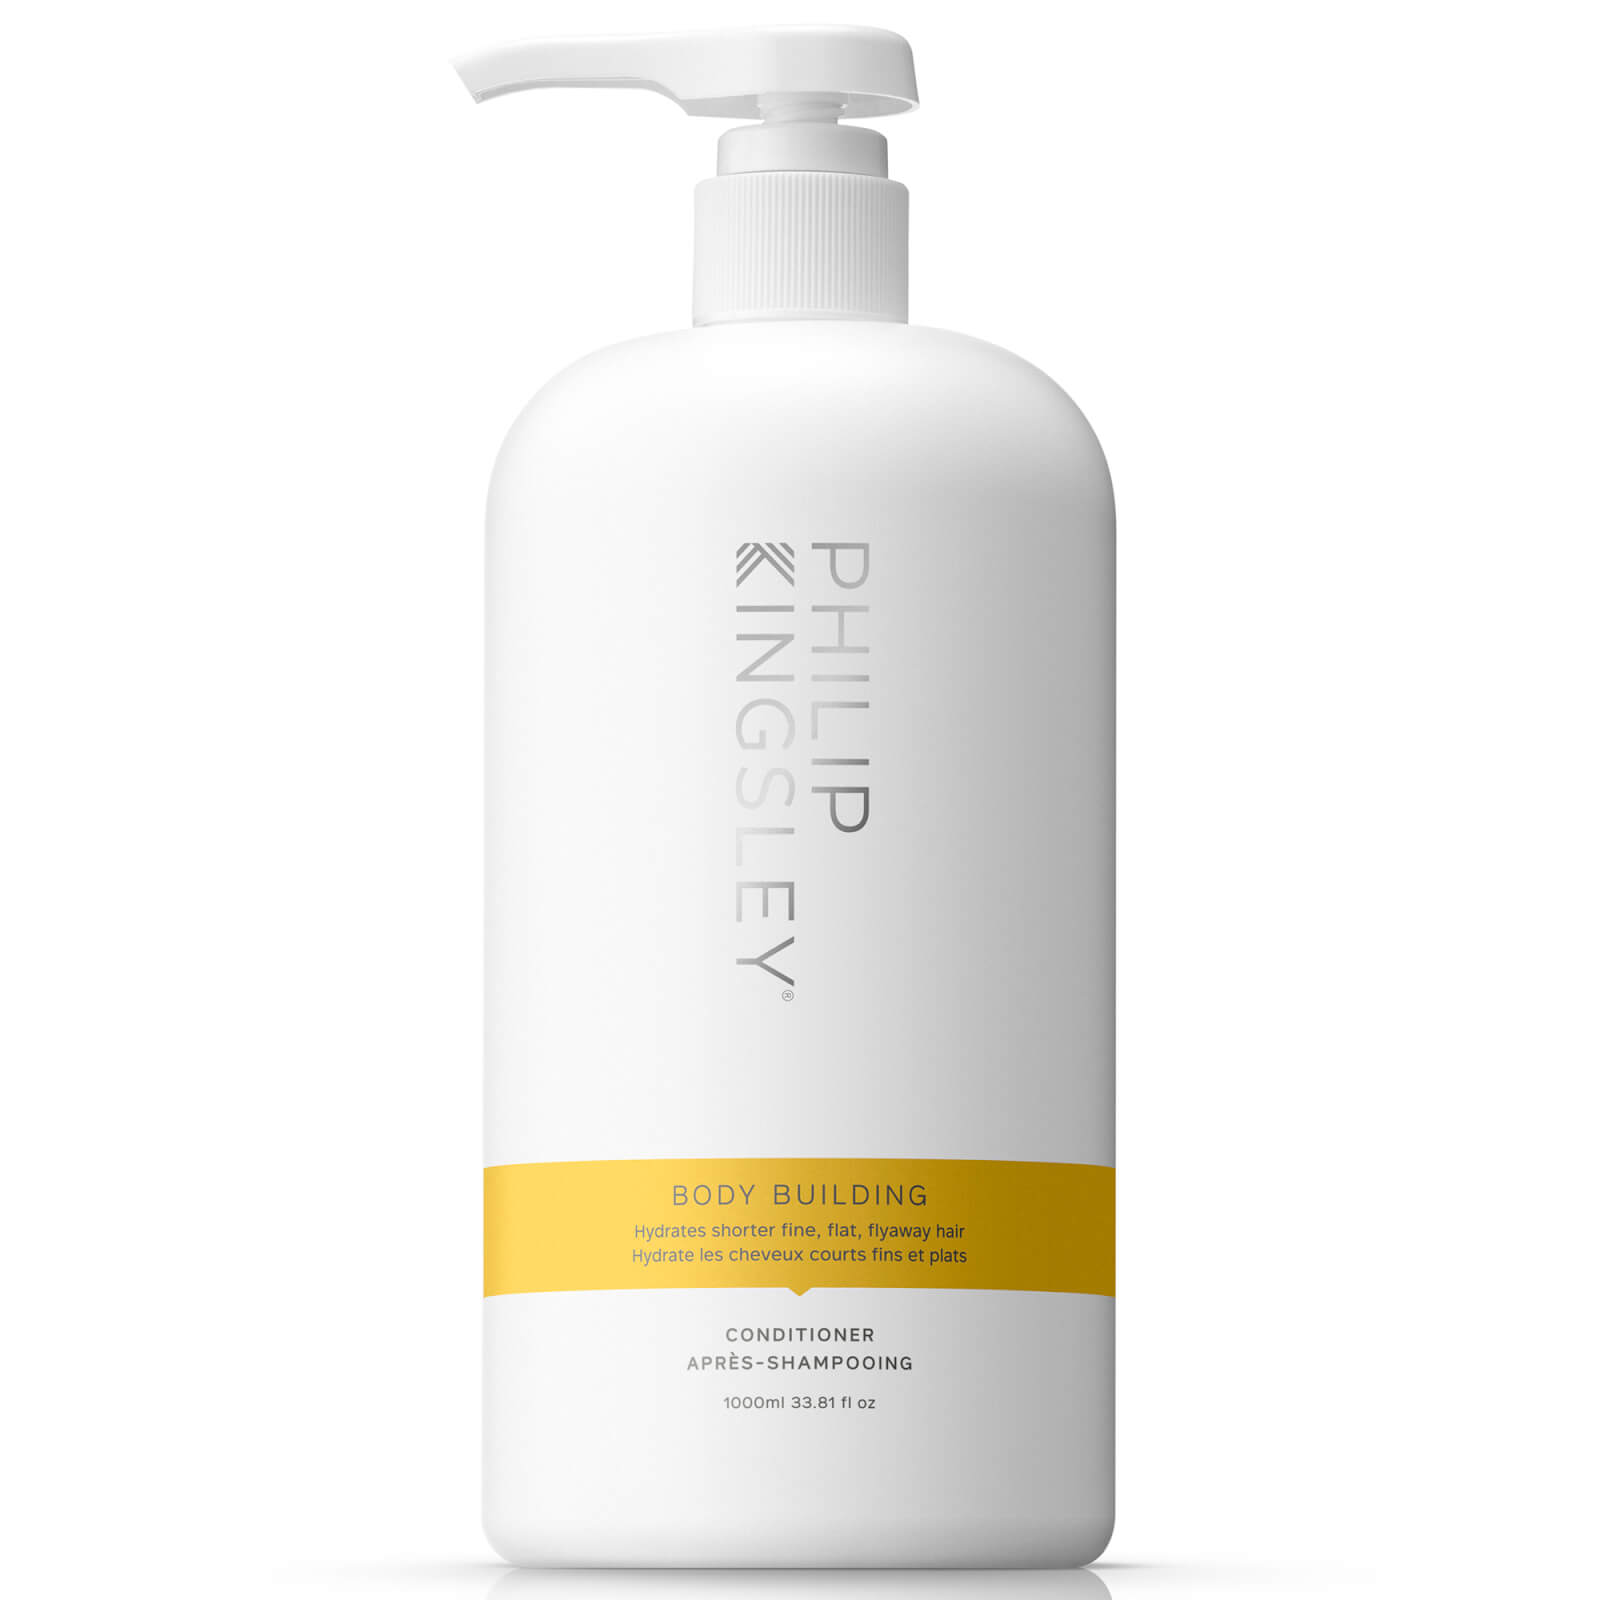 Philip Kingsley Body Building Conditioner 1000ml (Worth PS120.00)